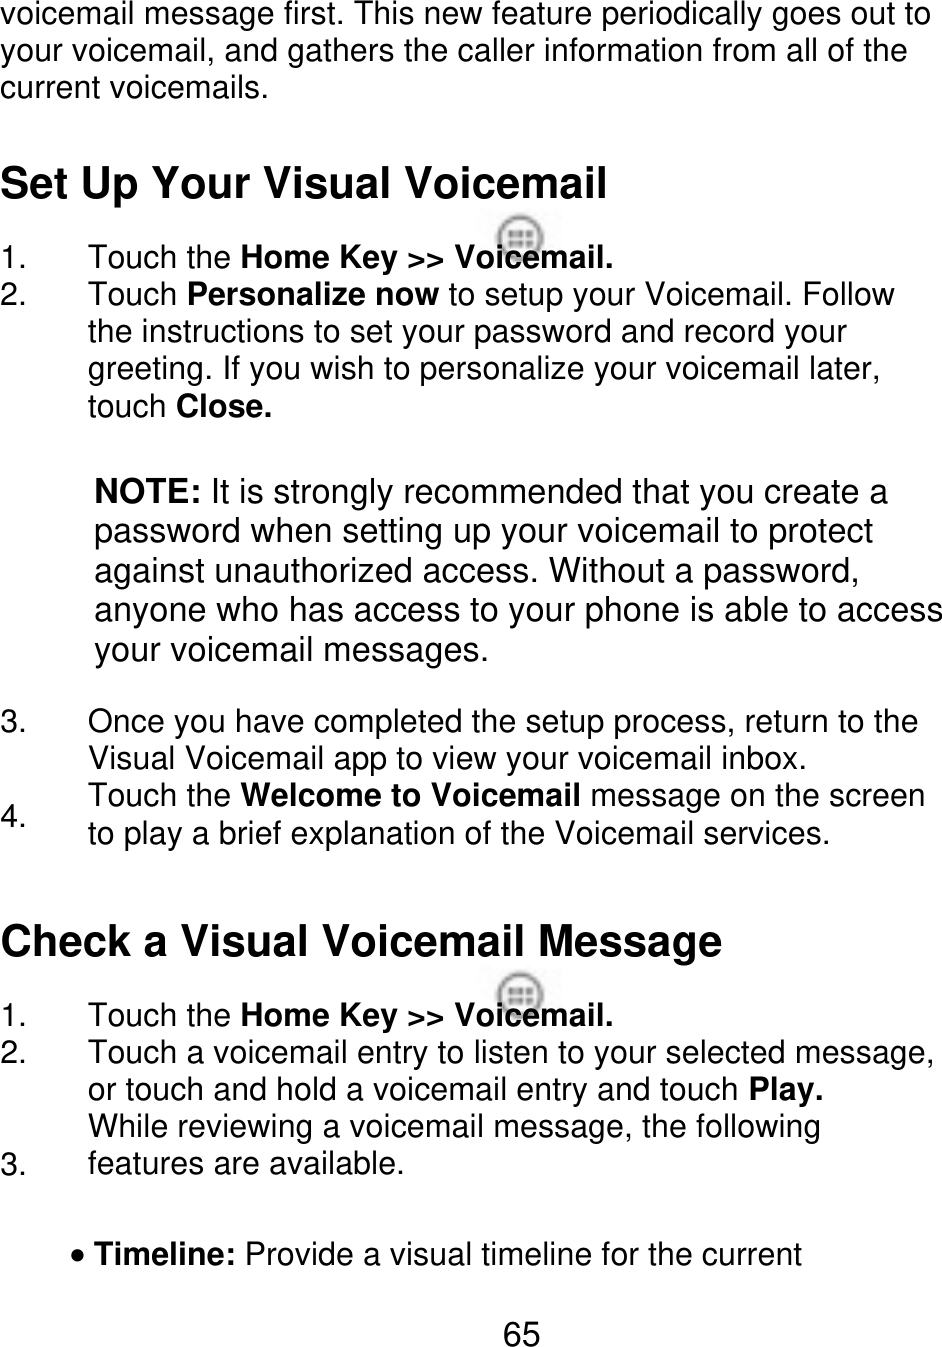 voicemail message first. This new feature periodically goes out to your voicemail, and gathers the caller information from all of the current voicemails. Set Up Your Visual Voicemail 1. 2. Touch the Home Key &gt;&gt; Voicemail. Touch Personalize now to setup your Voicemail. Follow the instructions to set your password and record your greeting. If you wish to personalize your voicemail later, touch Close. NOTE: It is strongly recommended that you create a password when setting up your voicemail to protect against unauthorized access. Without a password, anyone who has access to your phone is able to access your voicemail messages. 3. 4. Once you have completed the setup process, return to the Visual Voicemail app to view your voicemail inbox. Touch the Welcome to Voicemail message on the screen to play a brief explanation of the Voicemail services. Check a Visual Voicemail Message 1. 2. 3. Touch the Home Key &gt;&gt; Voicemail. Touch a voicemail entry to listen to your selected message, or touch and hold a voicemail entry and touch Play. While reviewing a voicemail message, the following features are available. Timeline: Provide a visual timeline for the current 65 